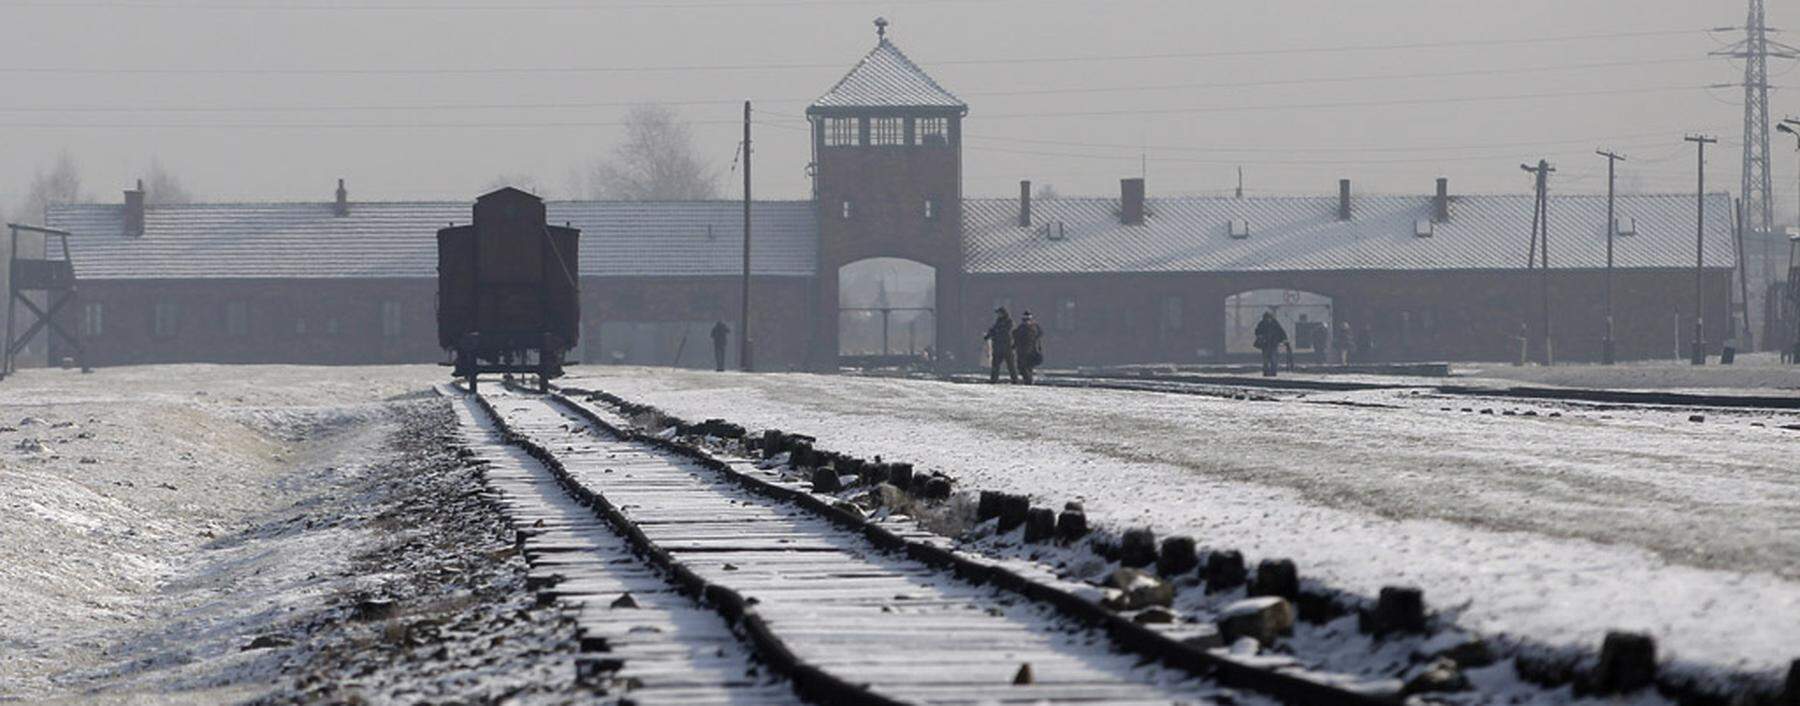 Former Auschwitz-Birkenau concentration camp is pictured during ceremonies to mark the 69th anniversary of the liberation and commemorate the victims of the Holocaust in Birkenau